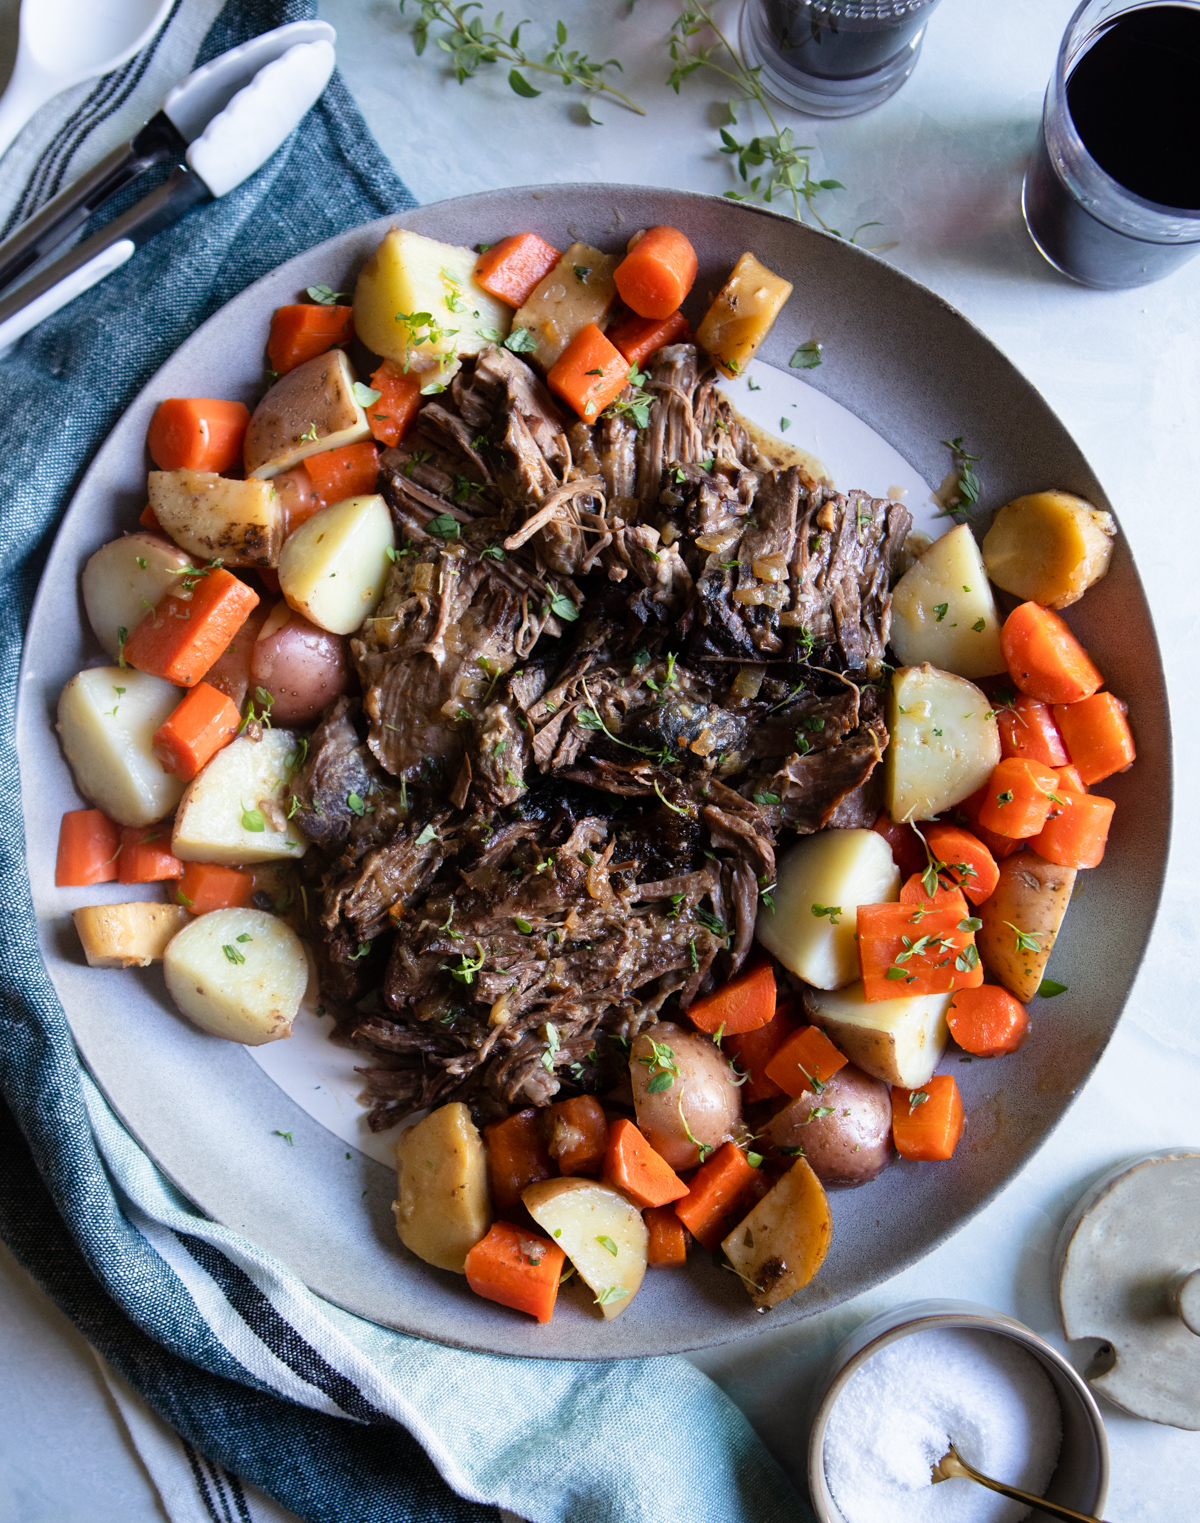 Top round roast cooked in a slow cooker on a gray platter surrounded by cooked root vegetables 